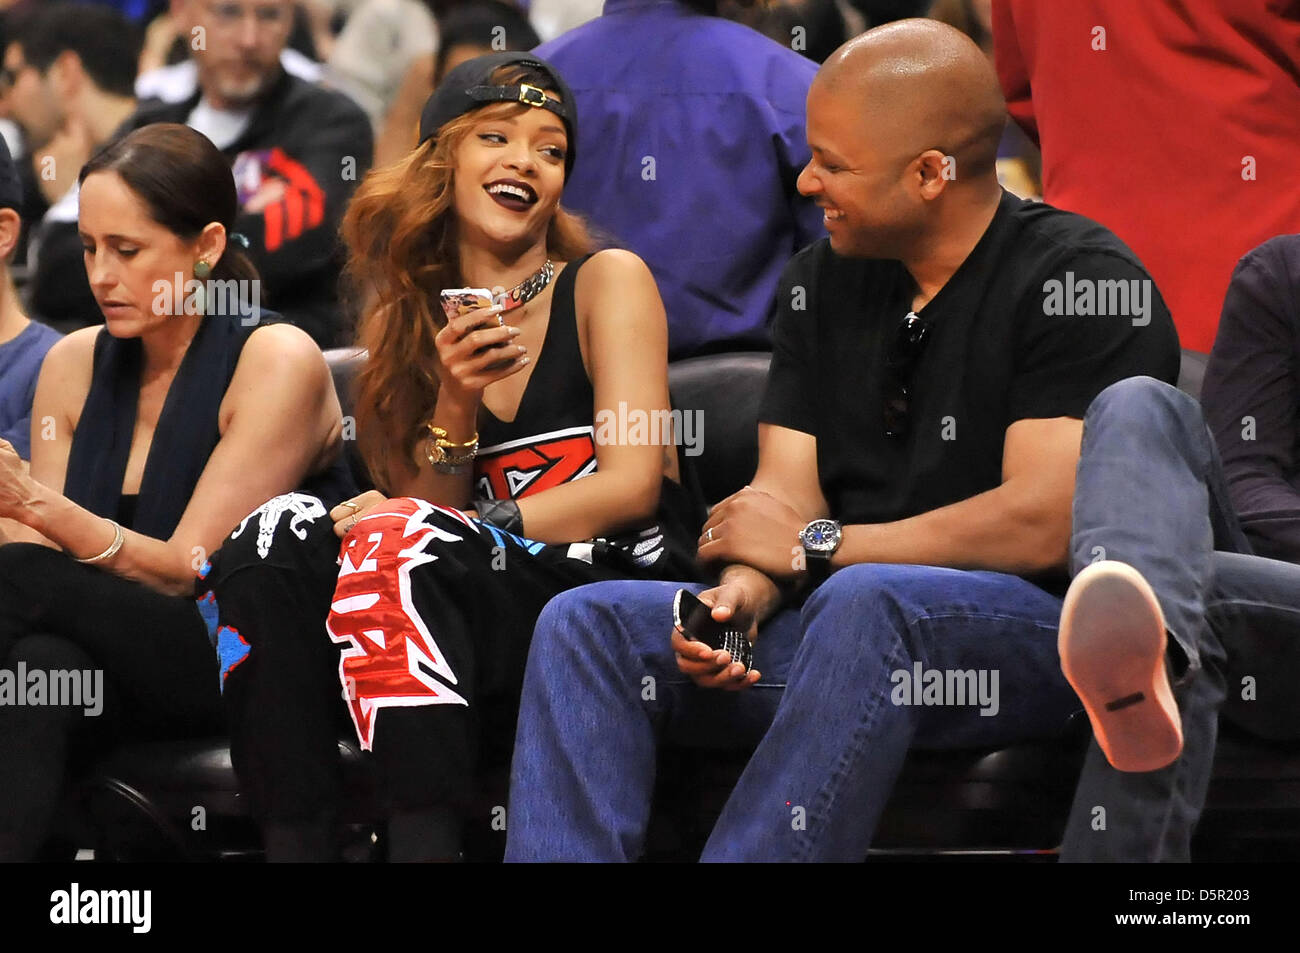 Los Angeles, California, USA. 7th April 2013. R&B Recording Artis Rihanna Robyn Fenty attends the NBA Basketball game between the Los Angeles Lakers and the Los Angeles Clippers at Staples Center in Los Angeles, California..The Los Angeles Clippers defeat the Los Angeles Lakers 109-95.Louis Lopez/CSM/Alamy Live News Stock Photo